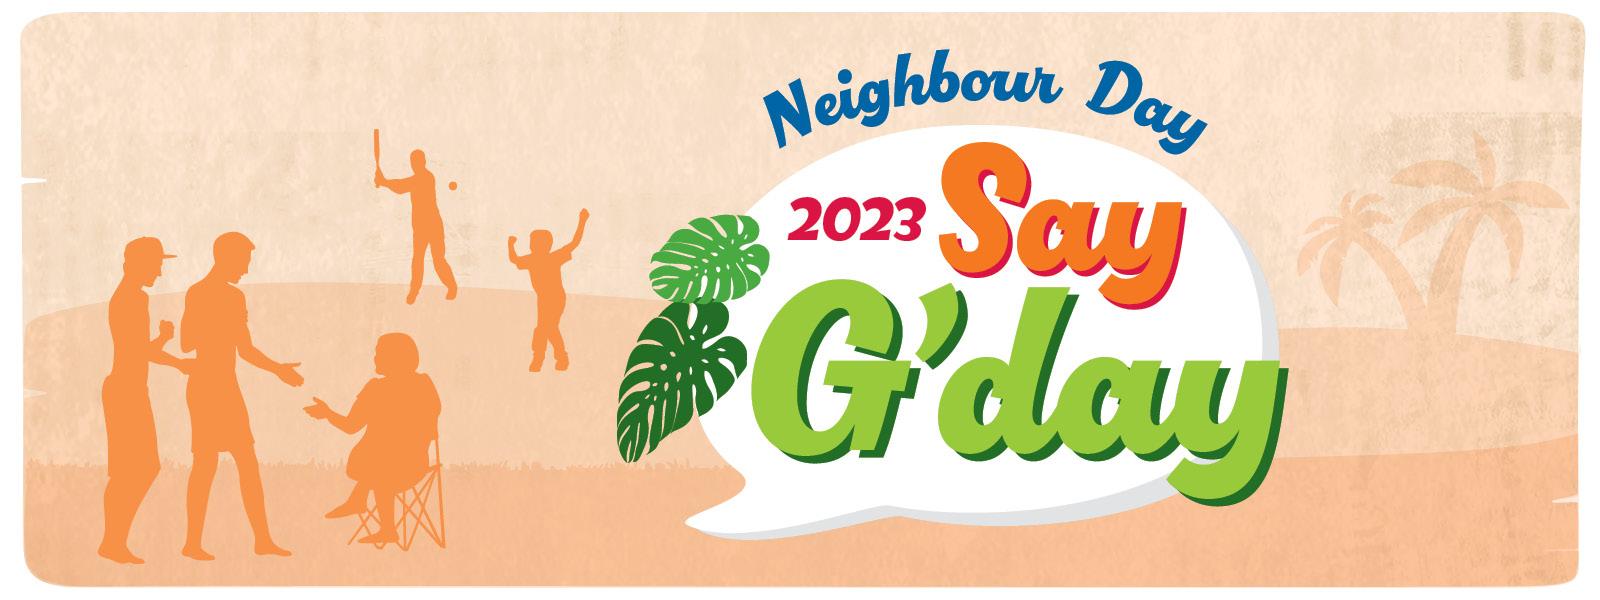 Neighbour Day 2023 is held on 26 March. Bundaberg Regional Council encourages the community to say g’day and build strong connections with their neighbours.